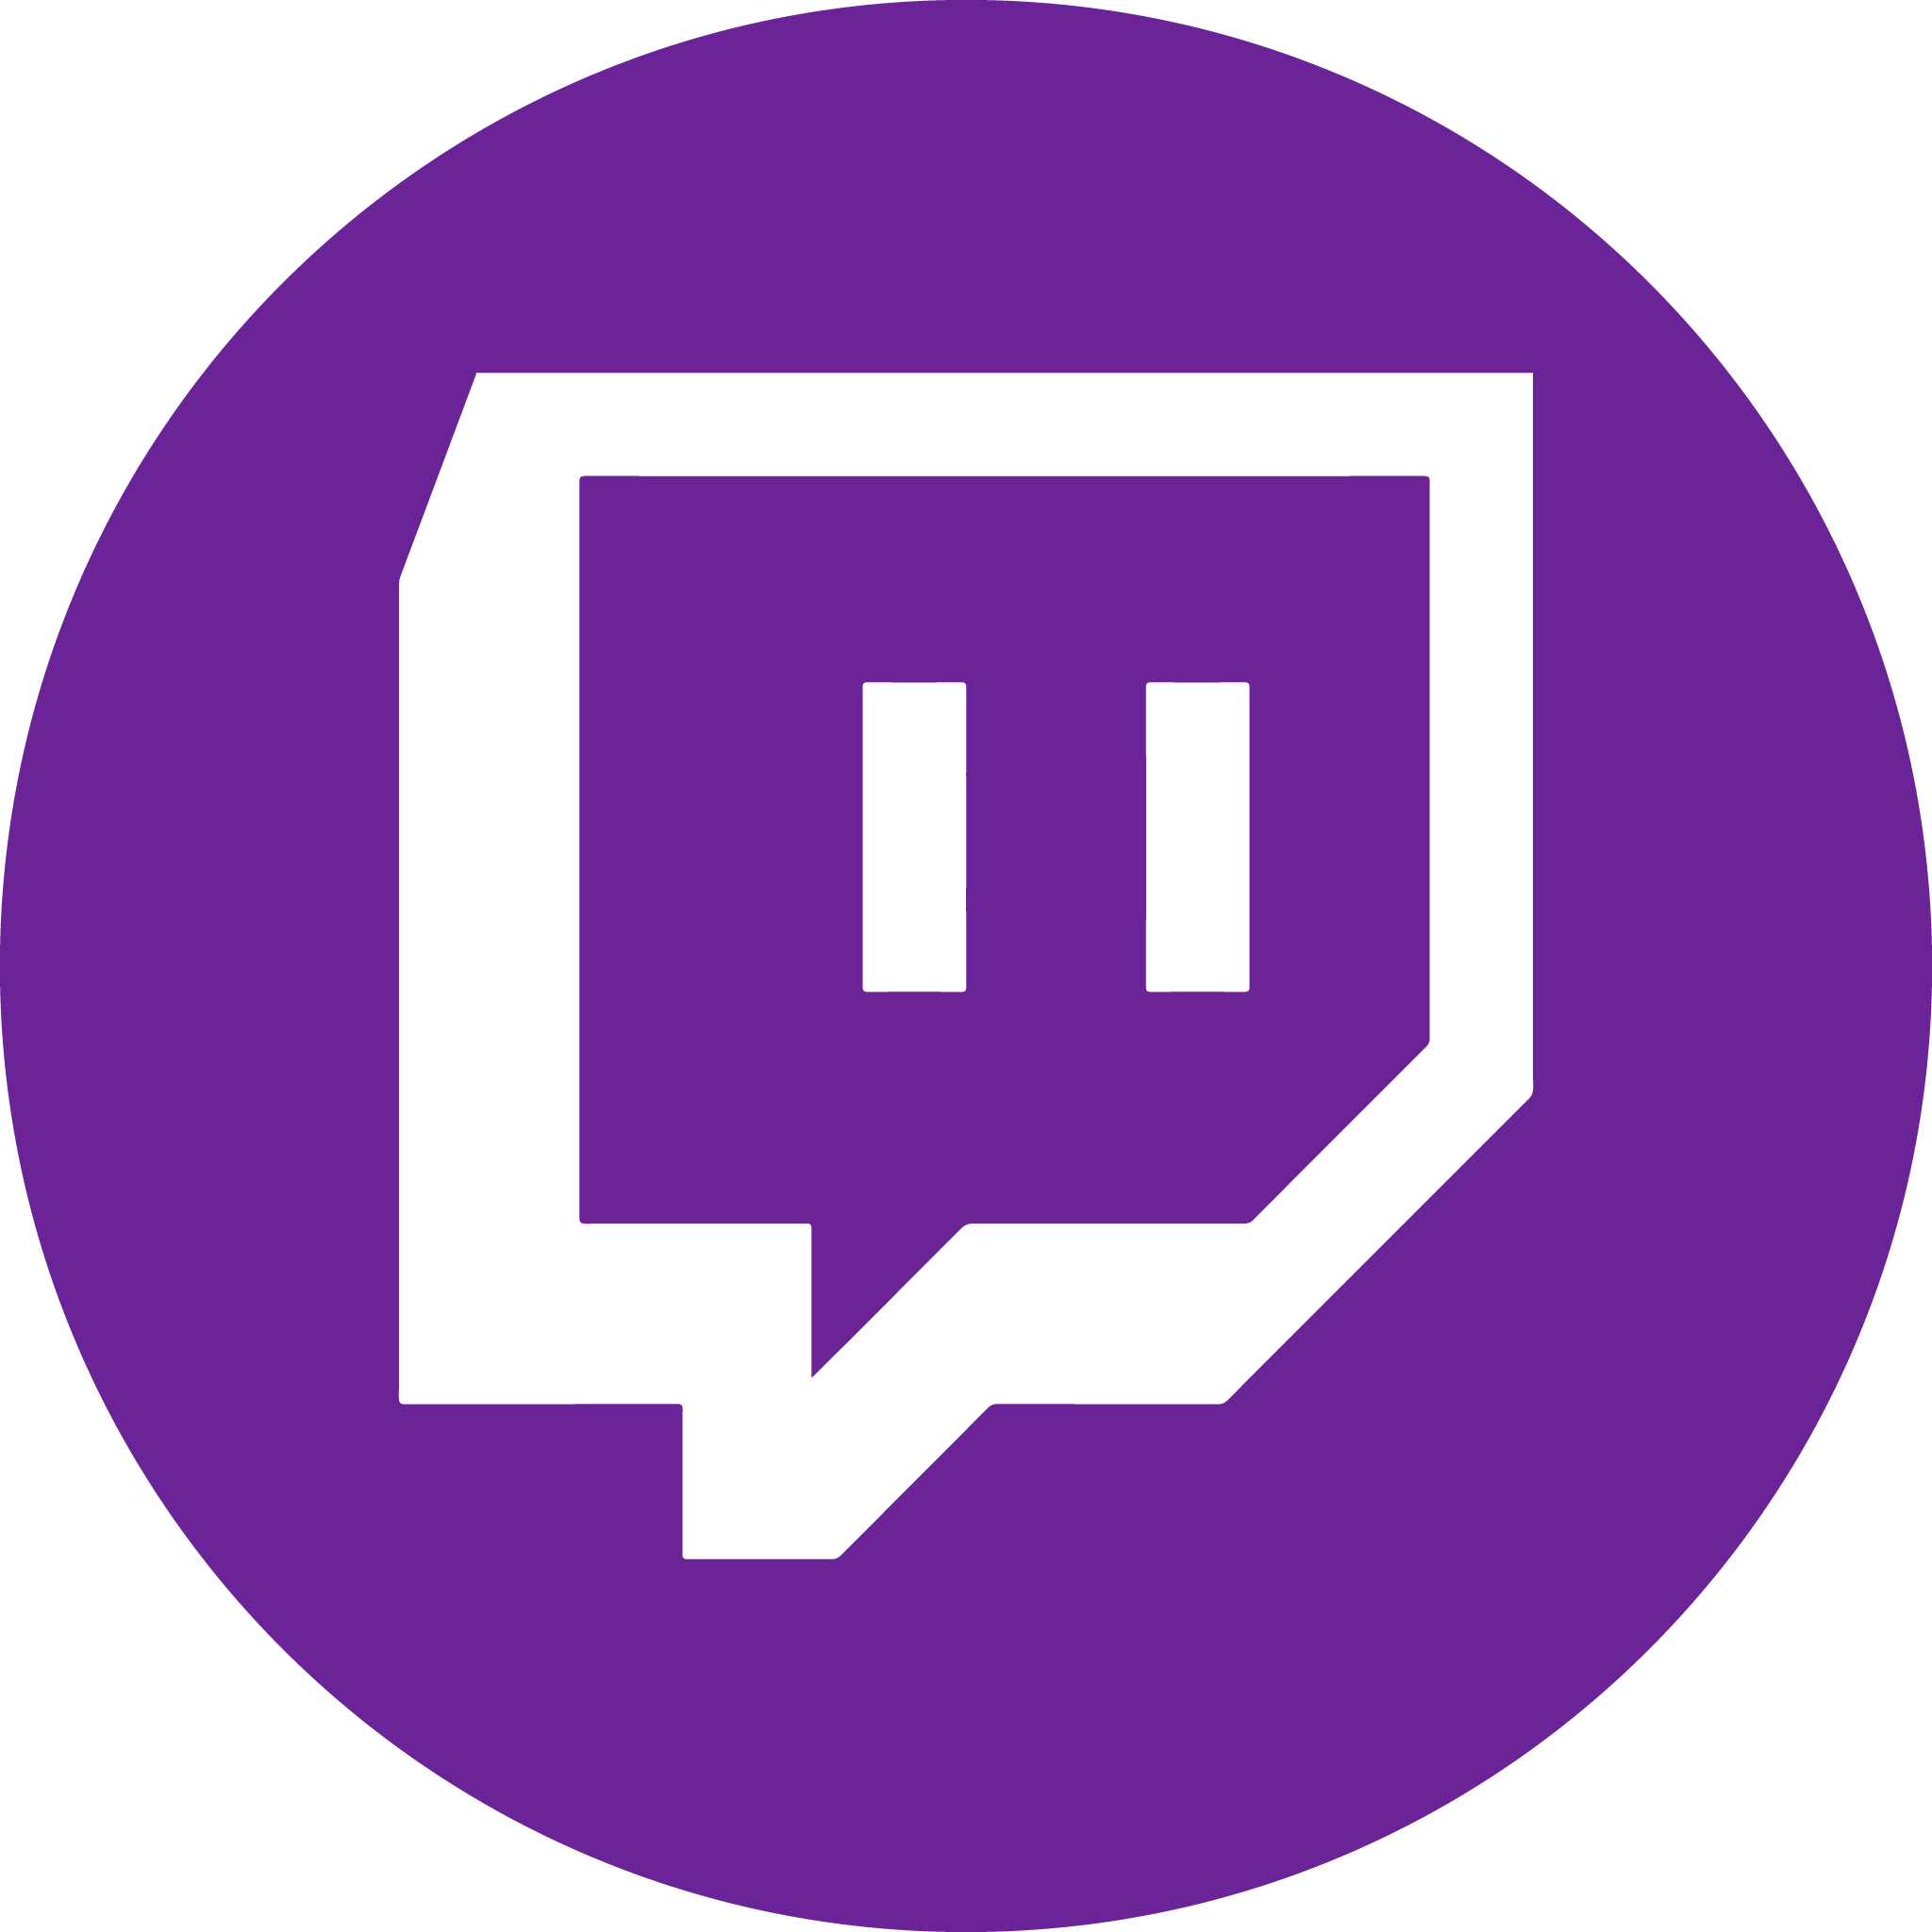 Twitch Logo Png Images Free Download - Twitch, Transparent background PNG HD thumbnail